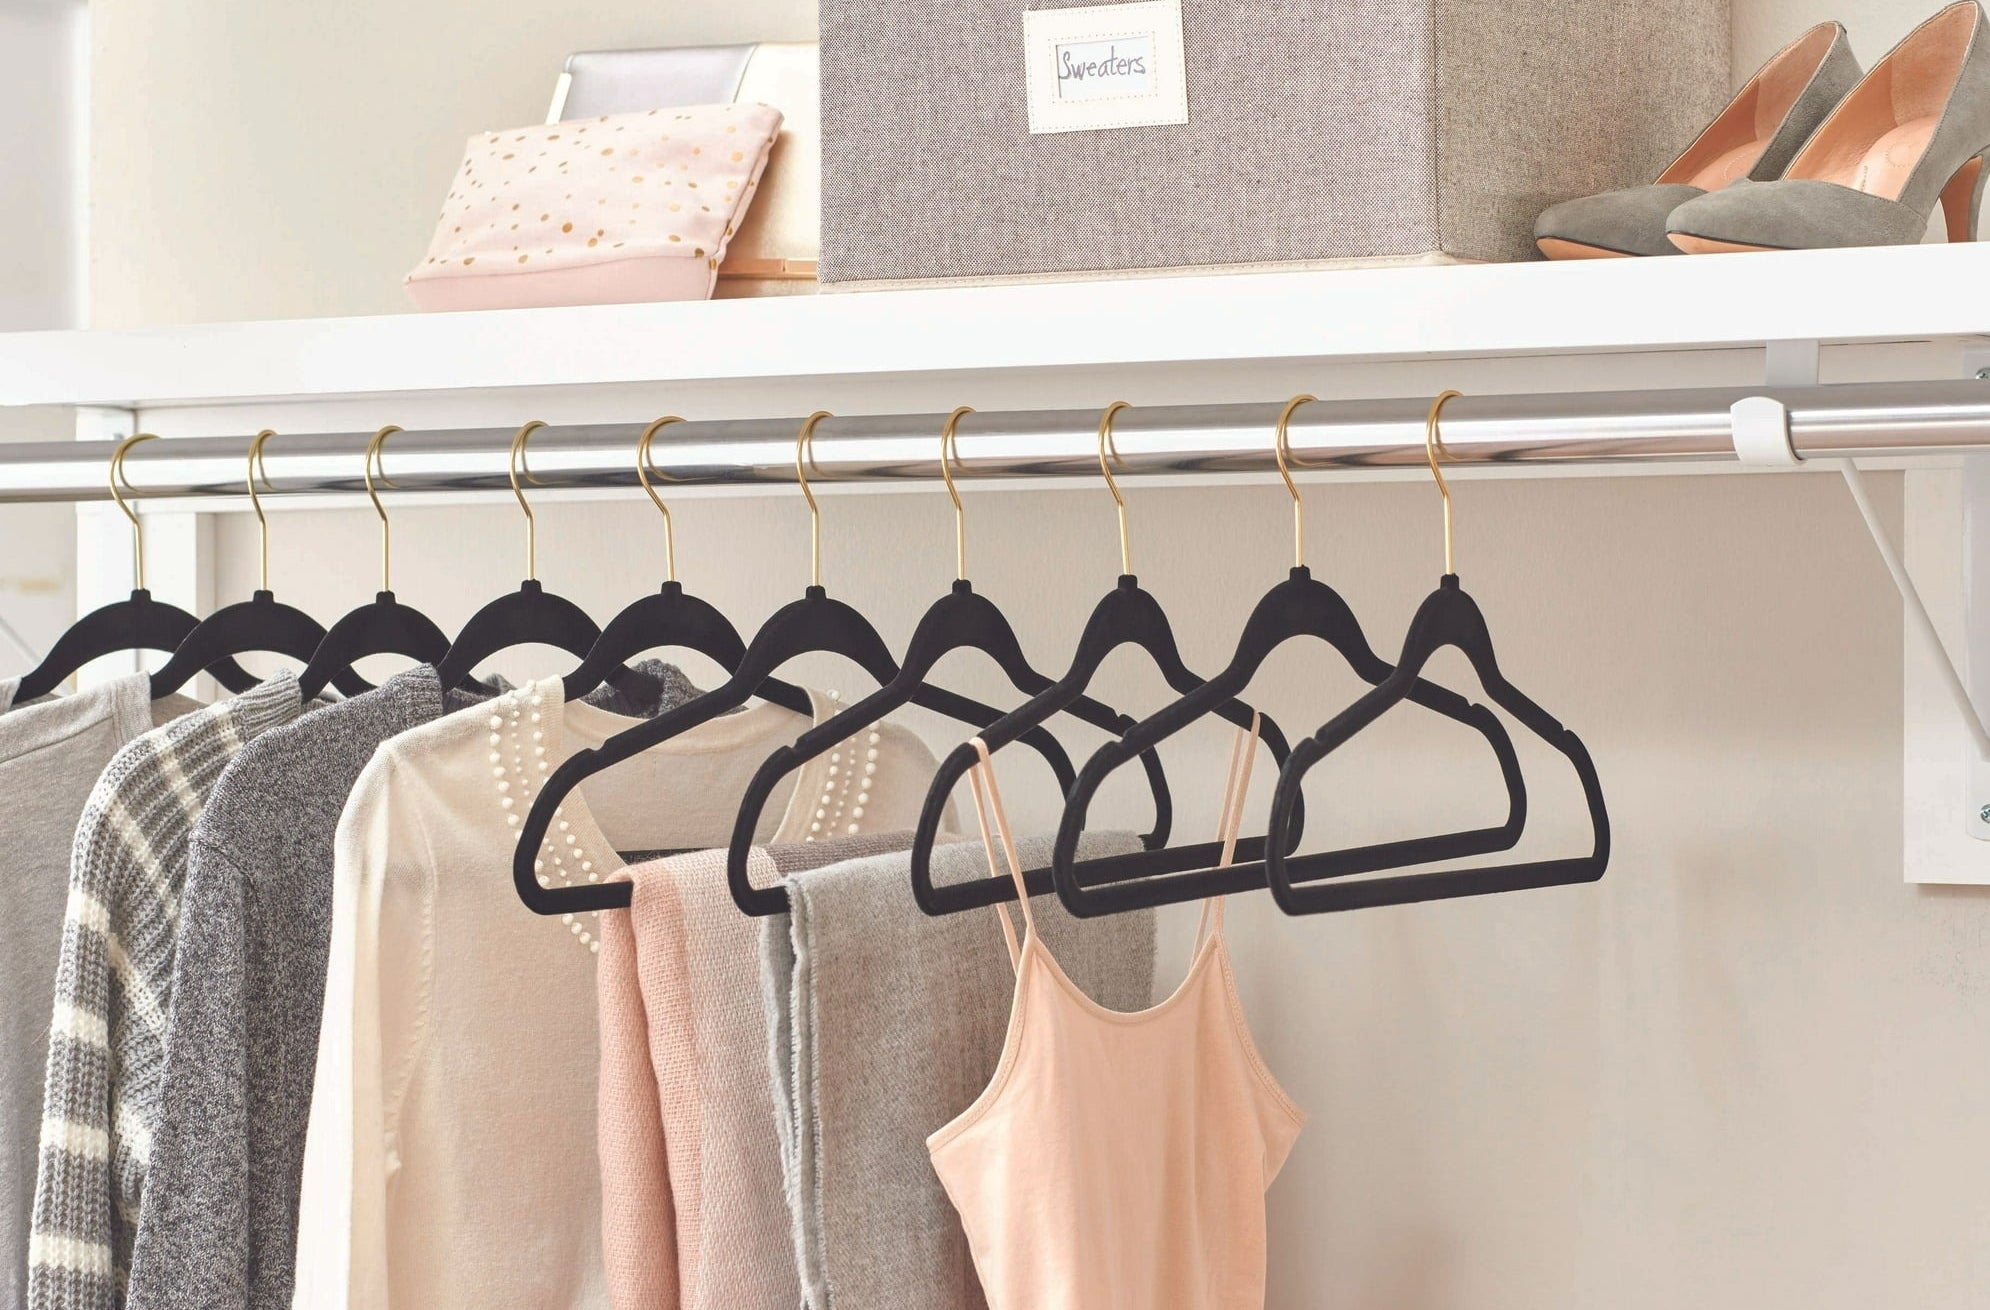 the hangers in a closet holding clothes